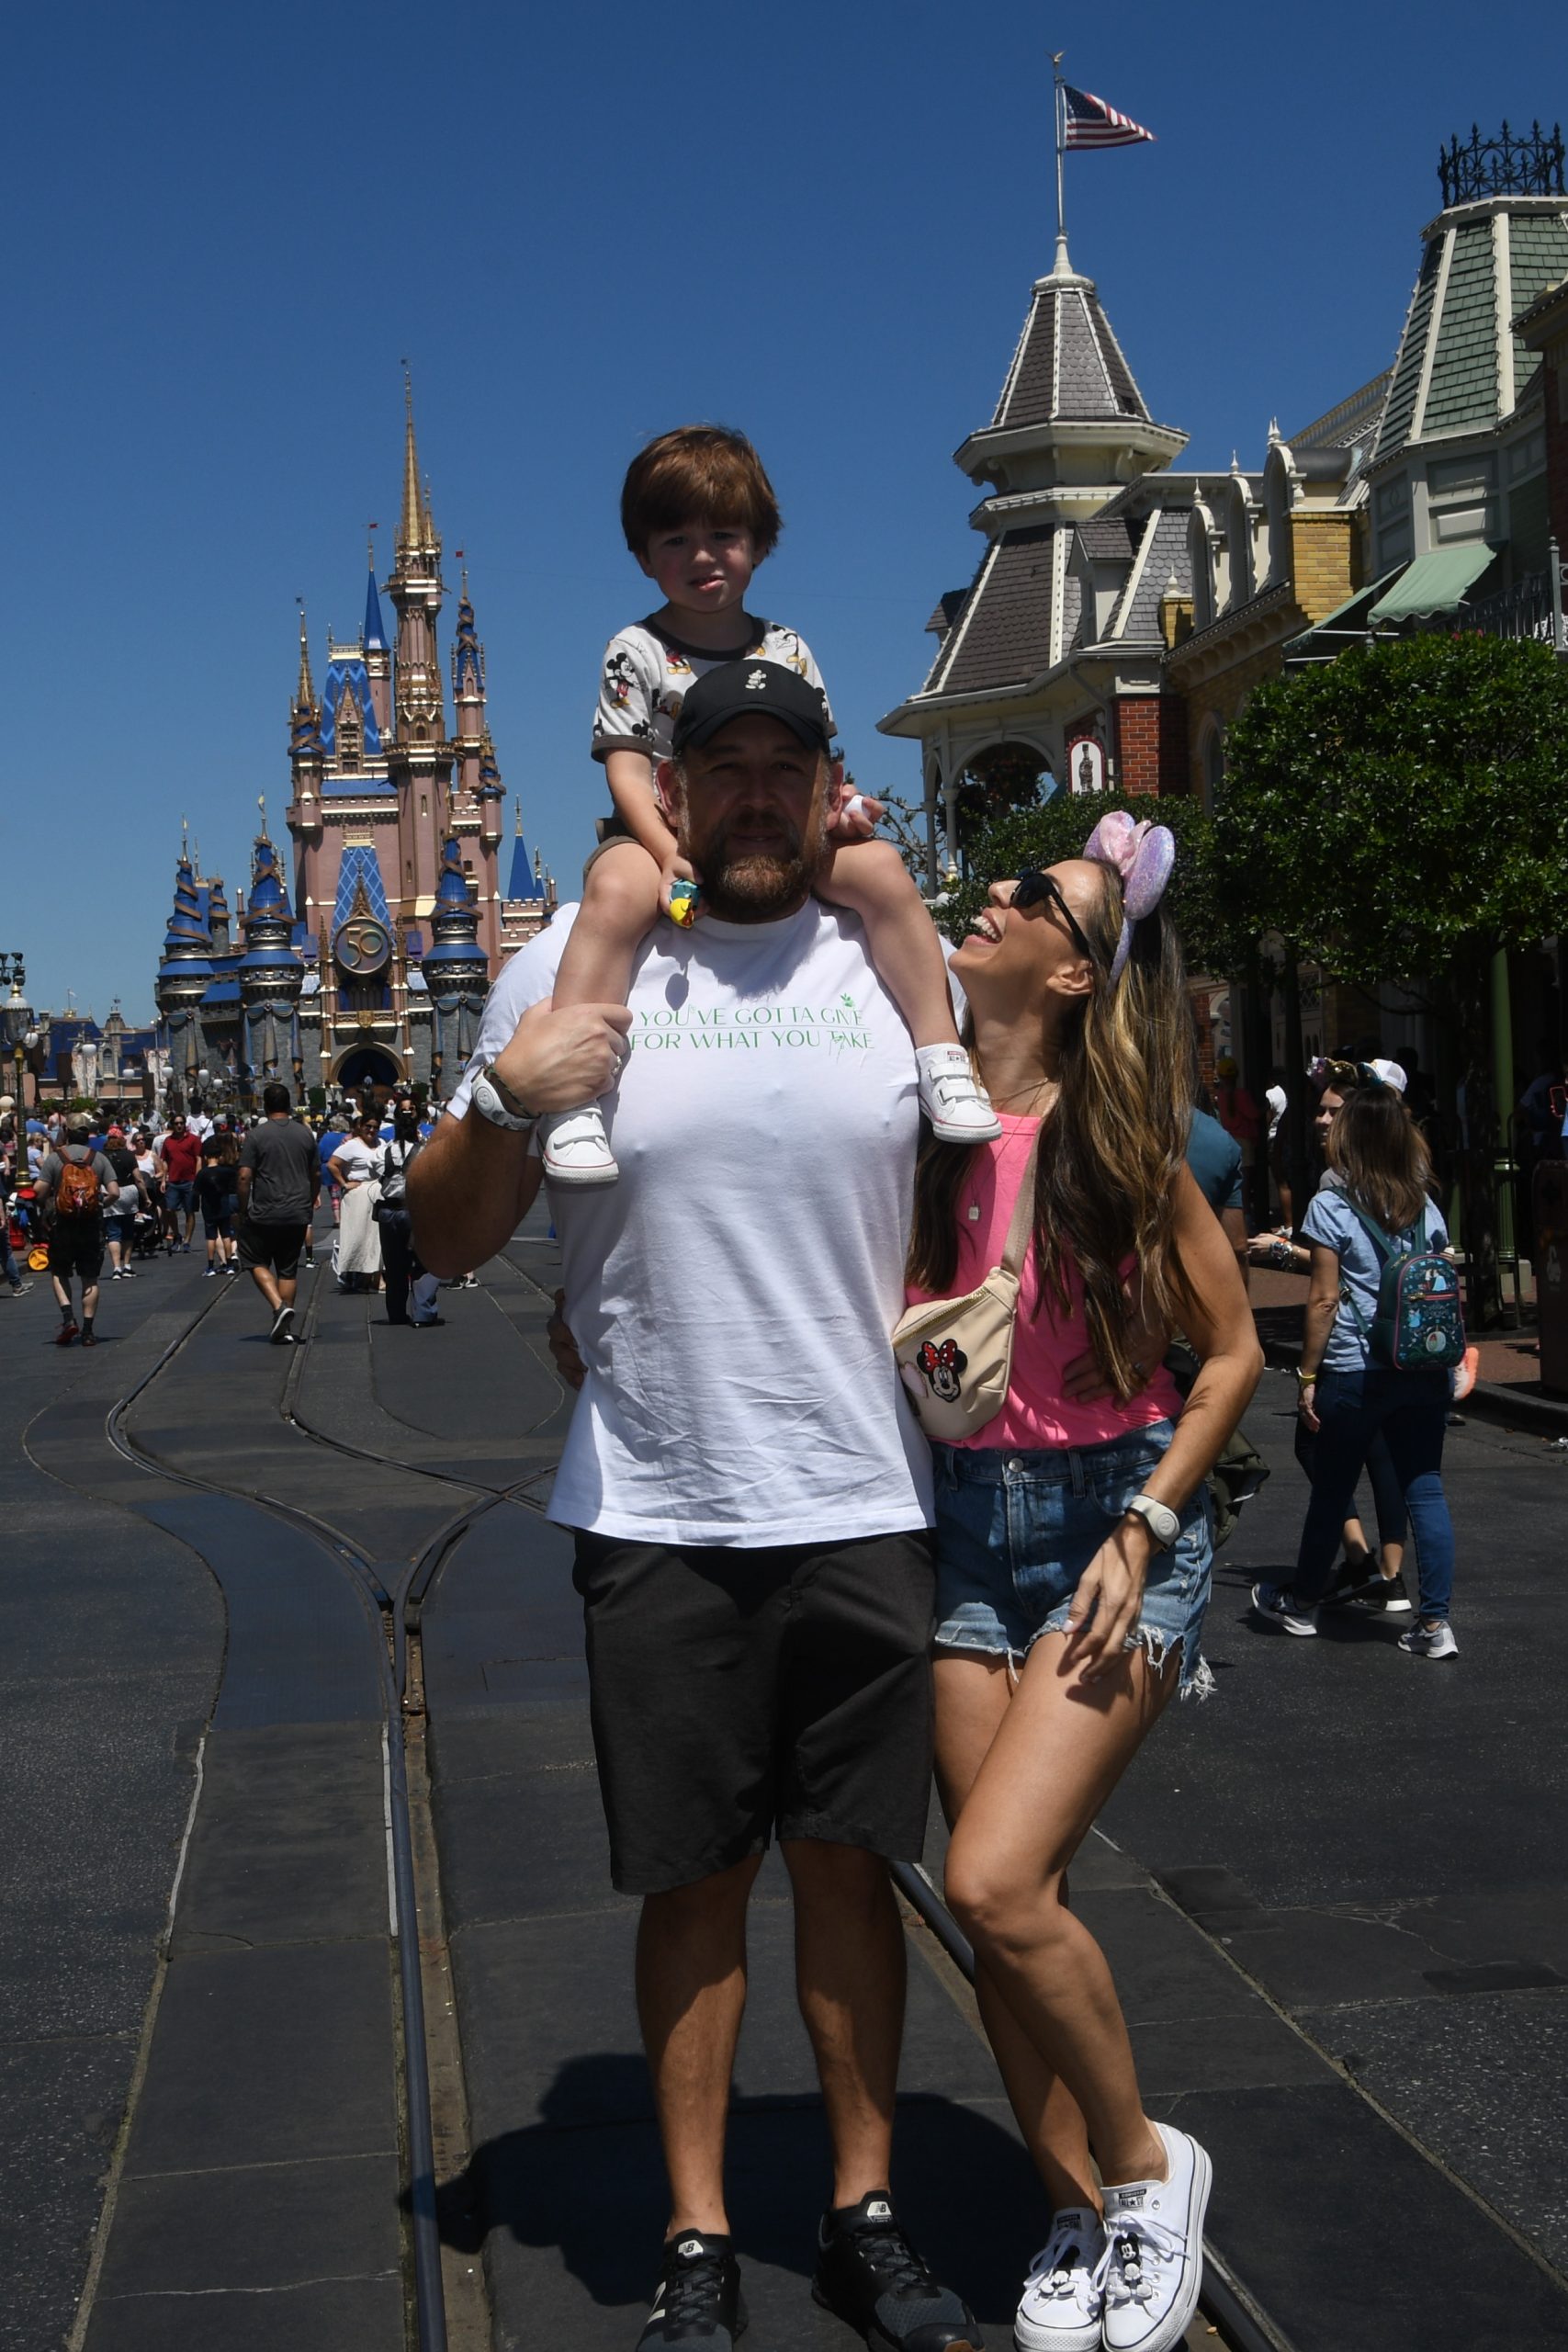 A family poses for a picture at the Magic Kingdom